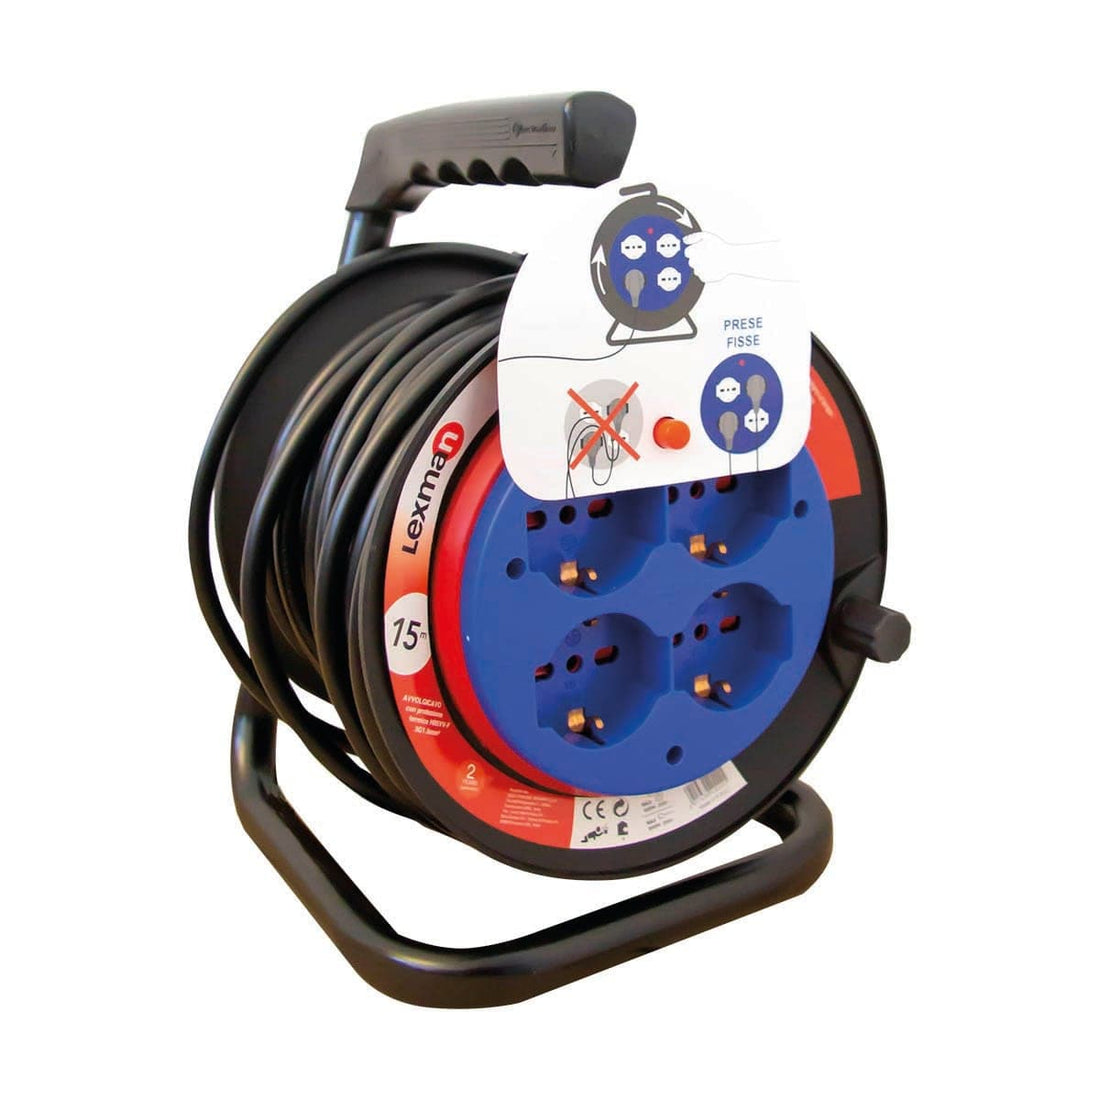 15MT CABLE REEL 16A PLUG 4 UNIVERSAL SOCKETS FIXED DRUM LEXMAN CIRCUIT BREAKER - best price from Maltashopper.com BR420210015